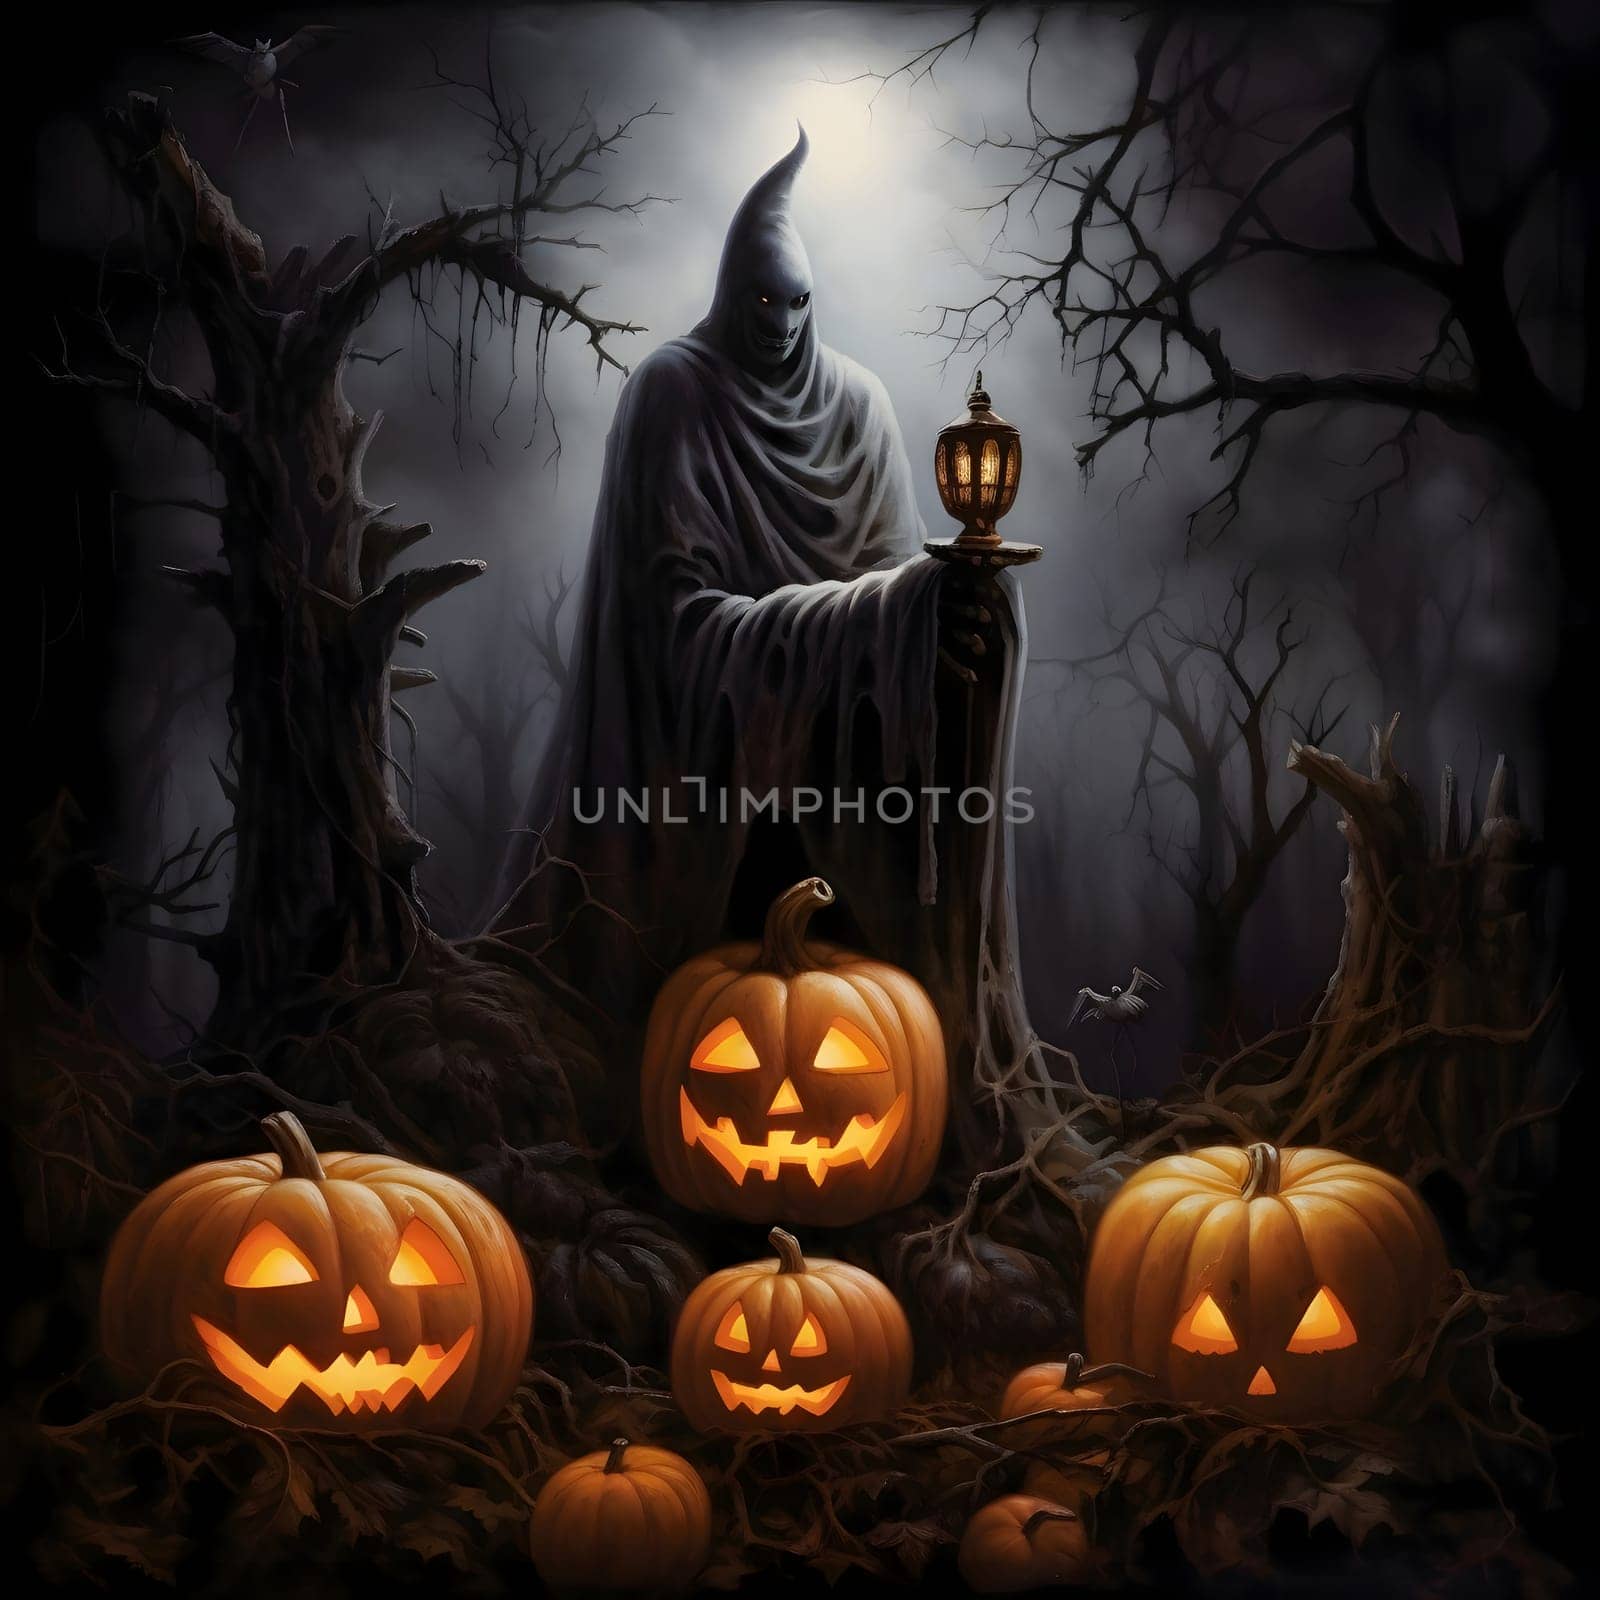 A dark figure in the background and a glowing jack-o-lantern pumpkin in an abandoned destroyed forest, a Halloween image. Atmosphere of darkness and fear.